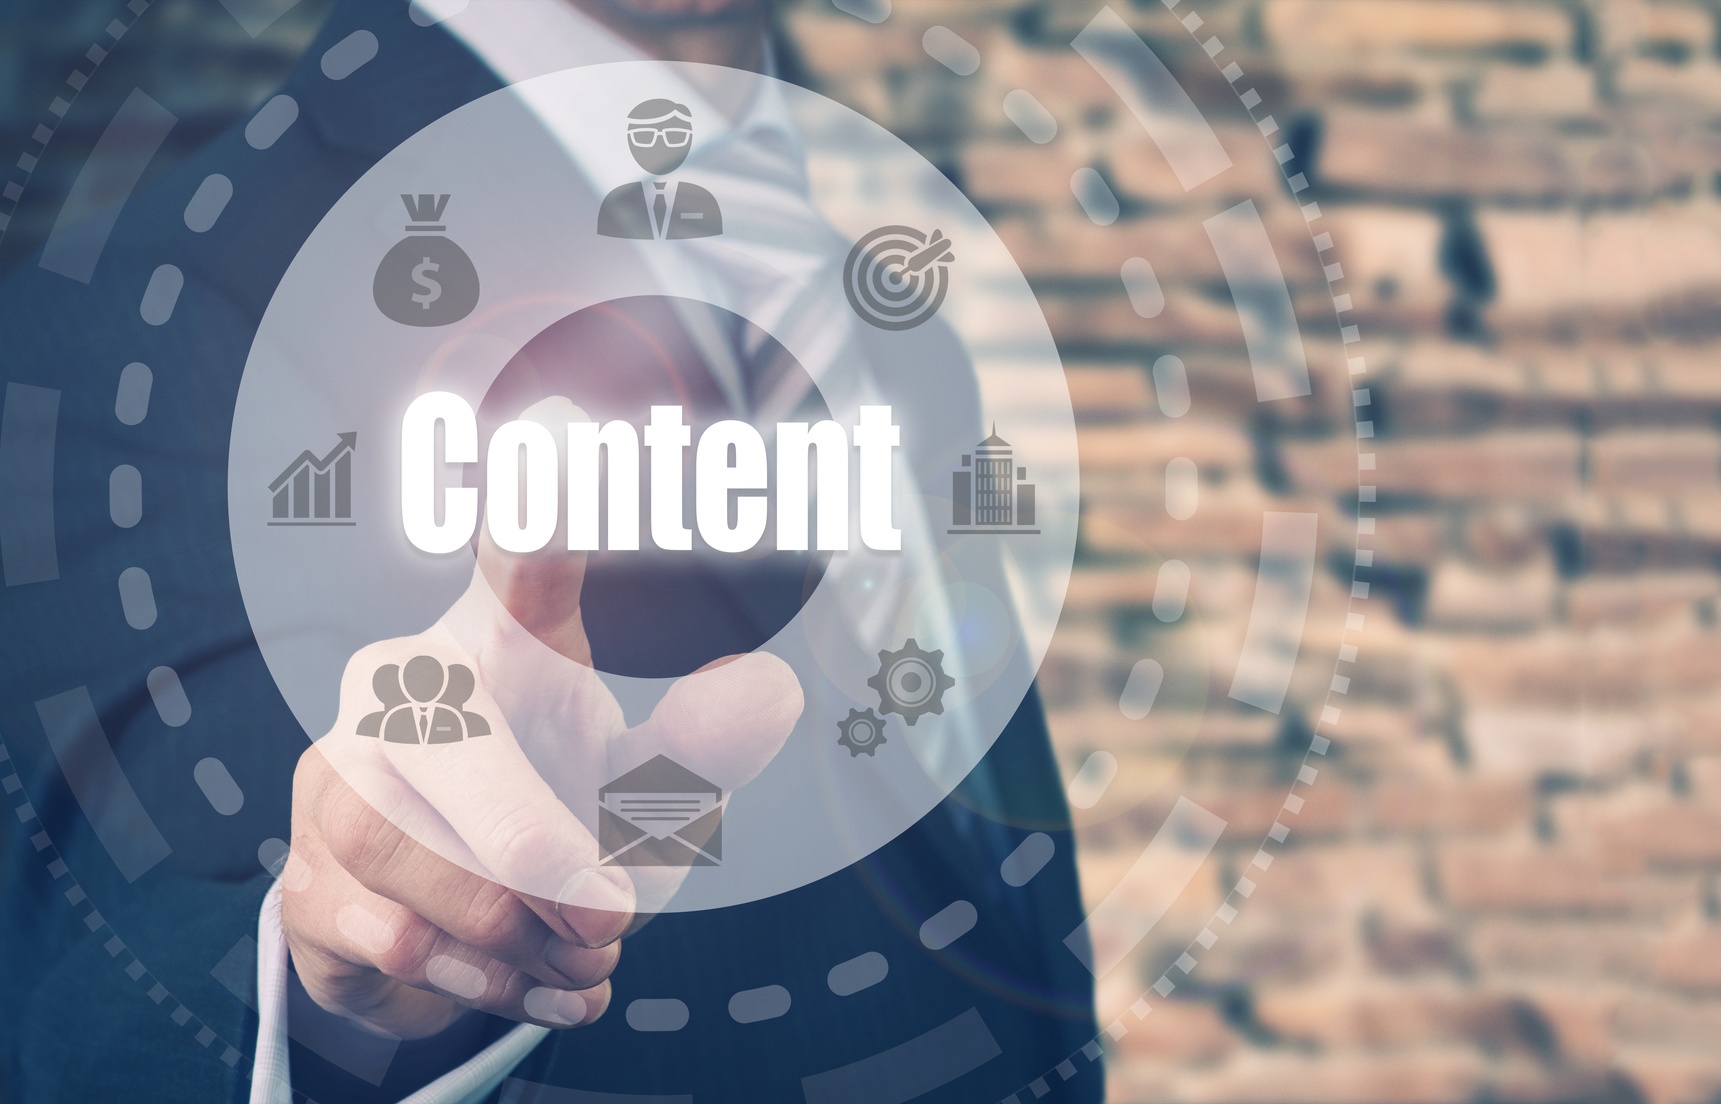 5 Ways to Create Website Content People Will Share